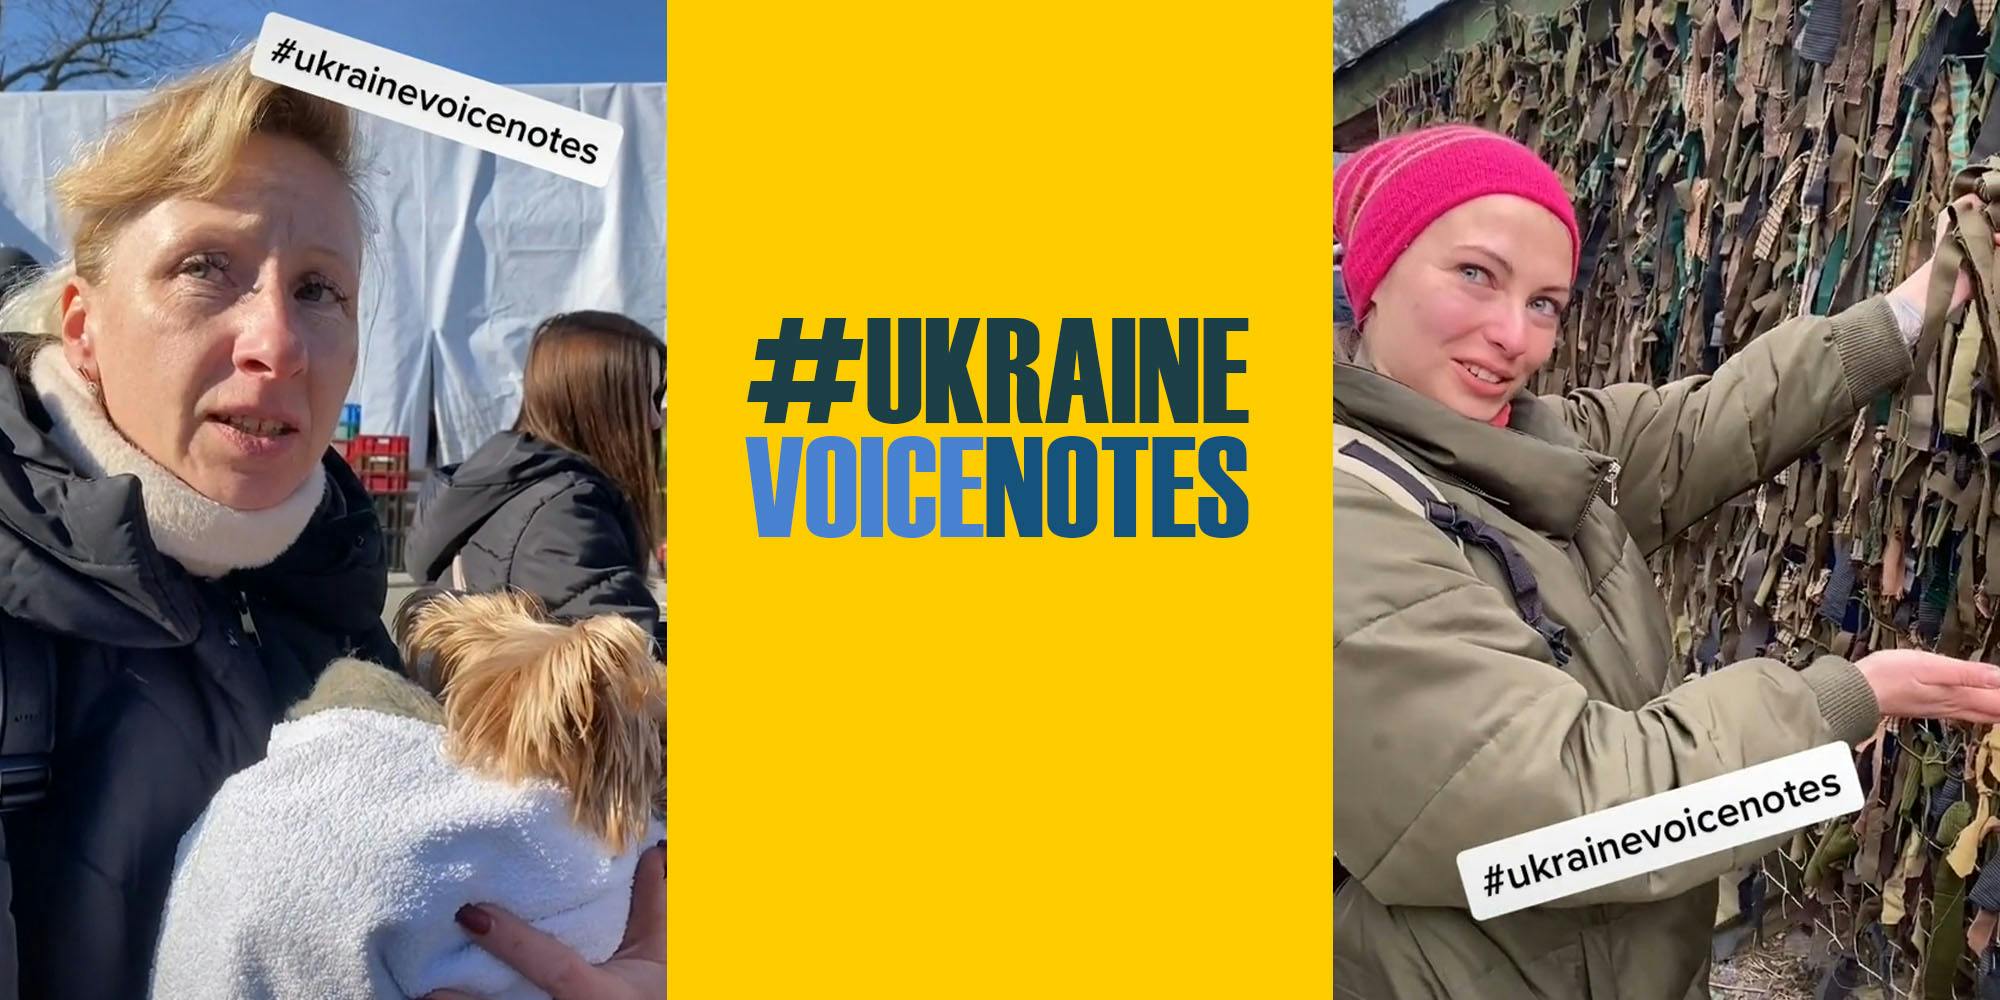 Woman holding dog telling her story caption "#ukrainevoicenotes" (l) Yellow background with caption "#ukrainevoicenotes" (c) Woman holding cloth up caption "#ukrainevoicenotes" (r)